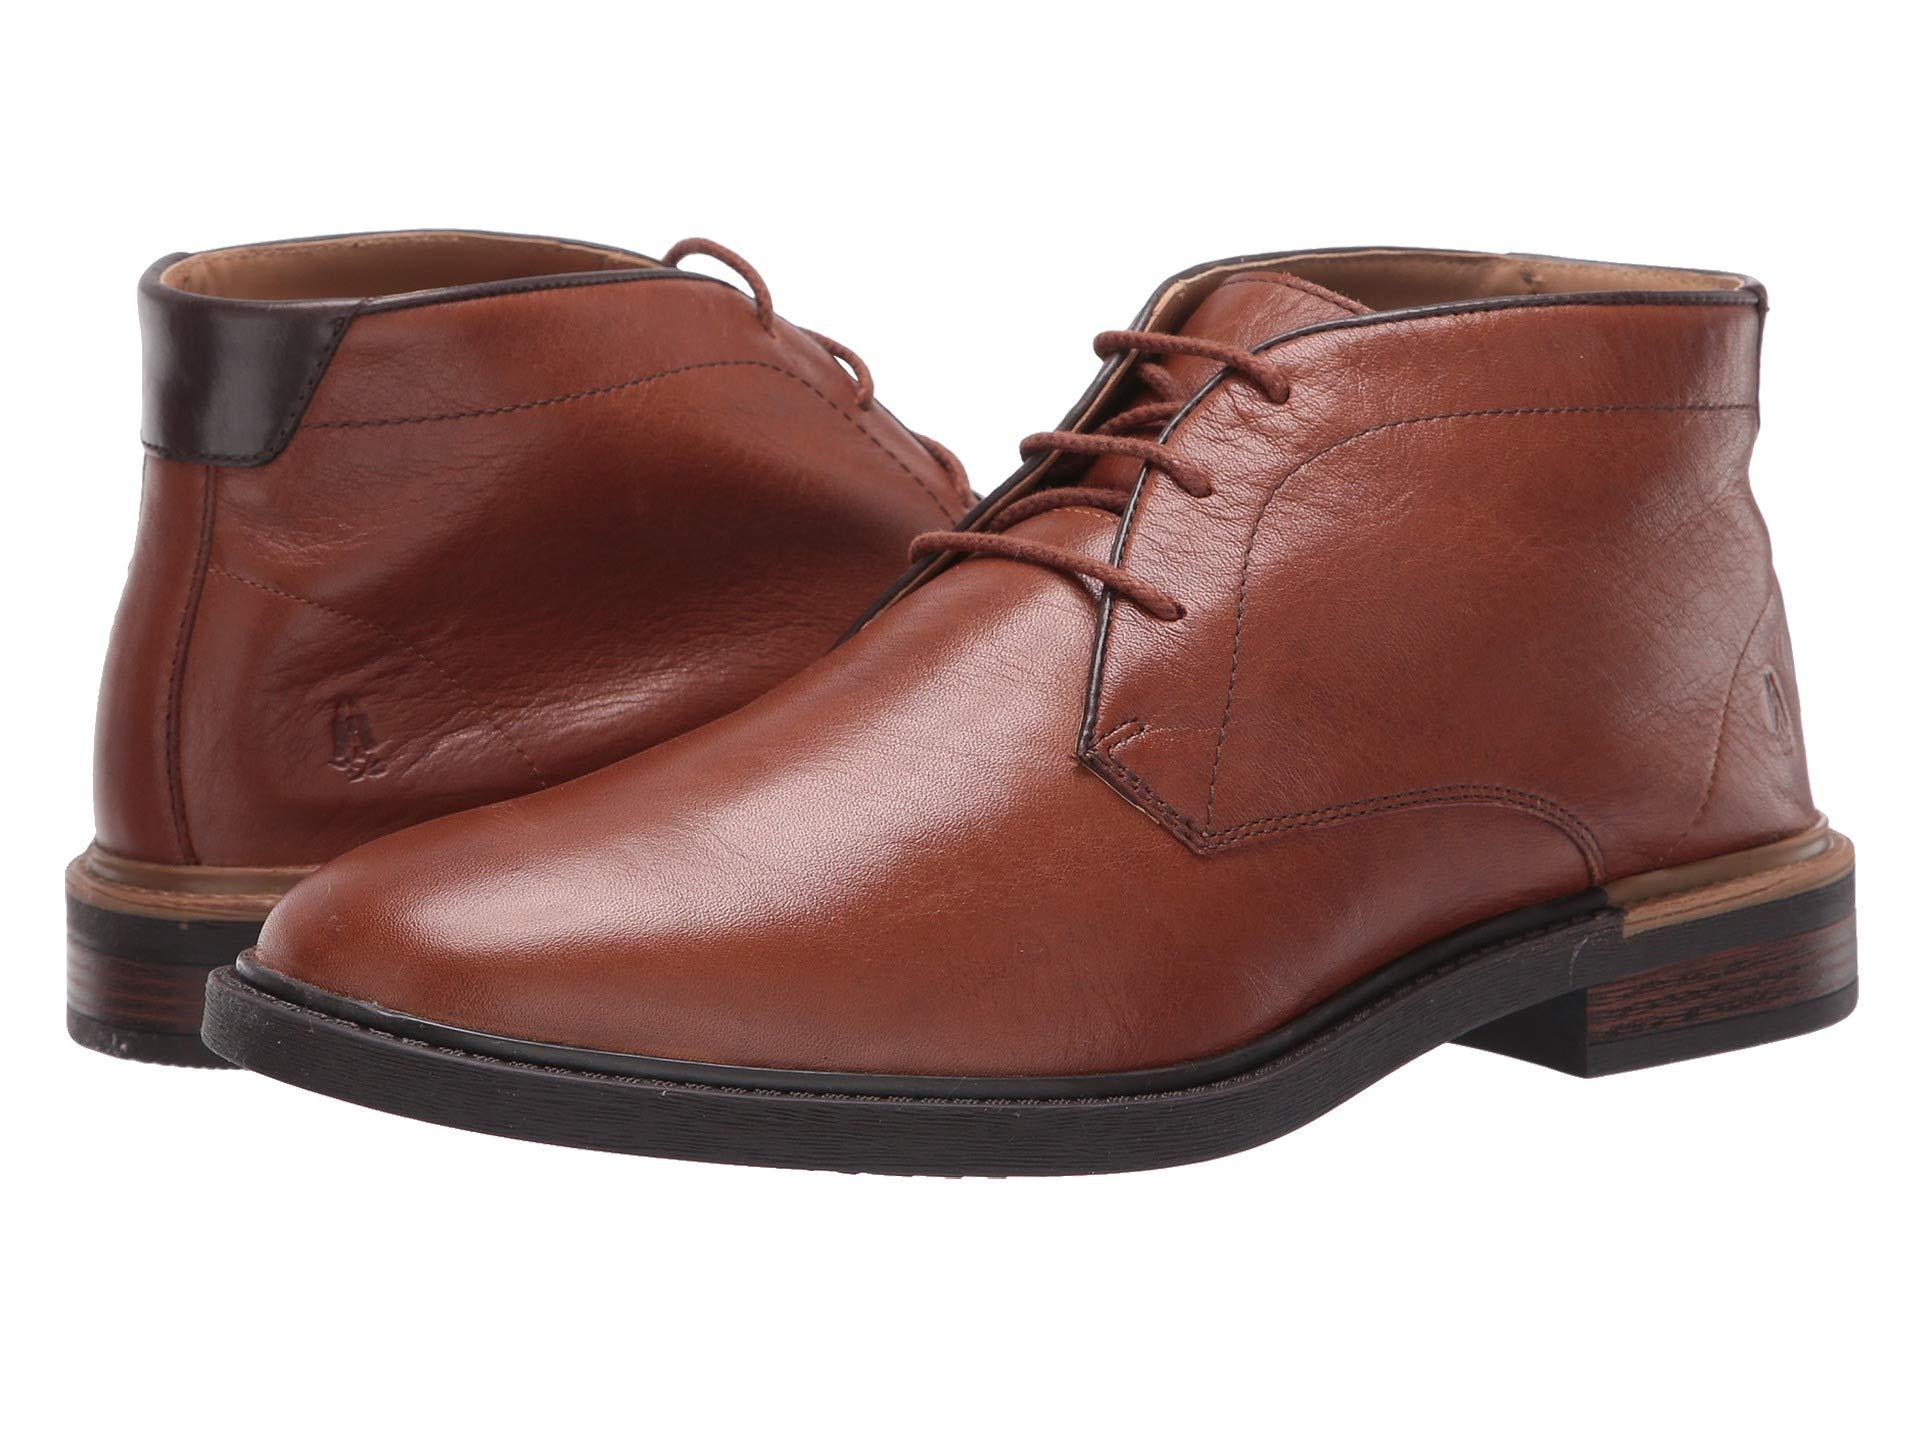 Hush Puppies Leather Davis Chukka Boot in Brown for Men - Lyst